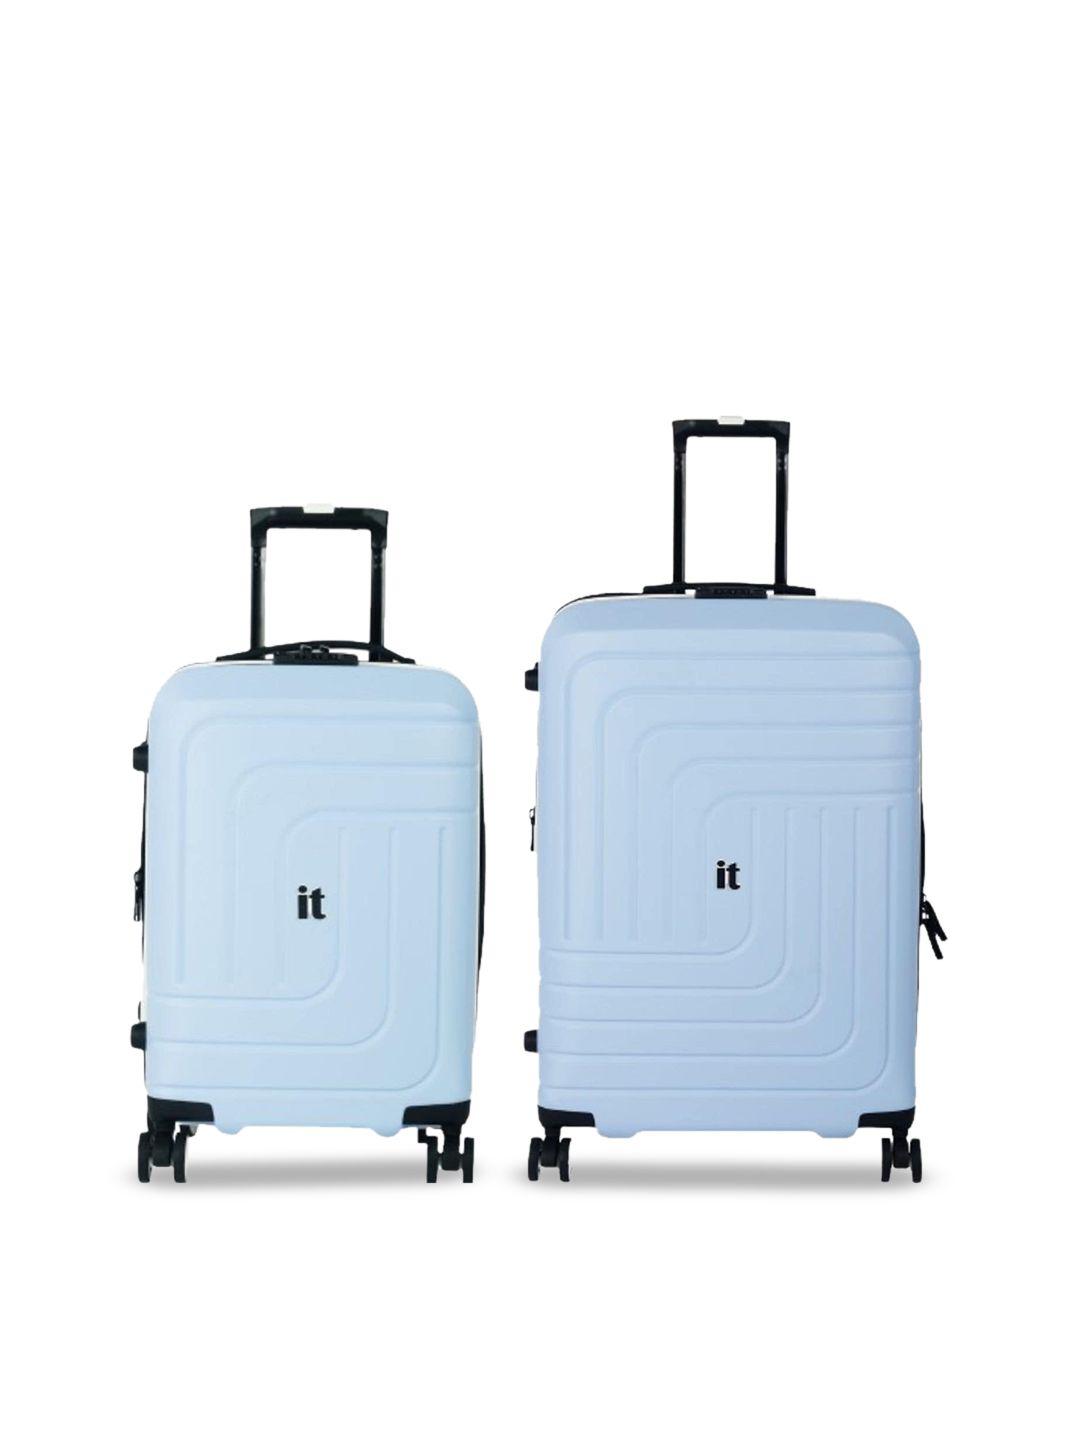 IT luggage Set Of 2 Convolved Textured 24 inches Hard-Sided Trolley Suitcase